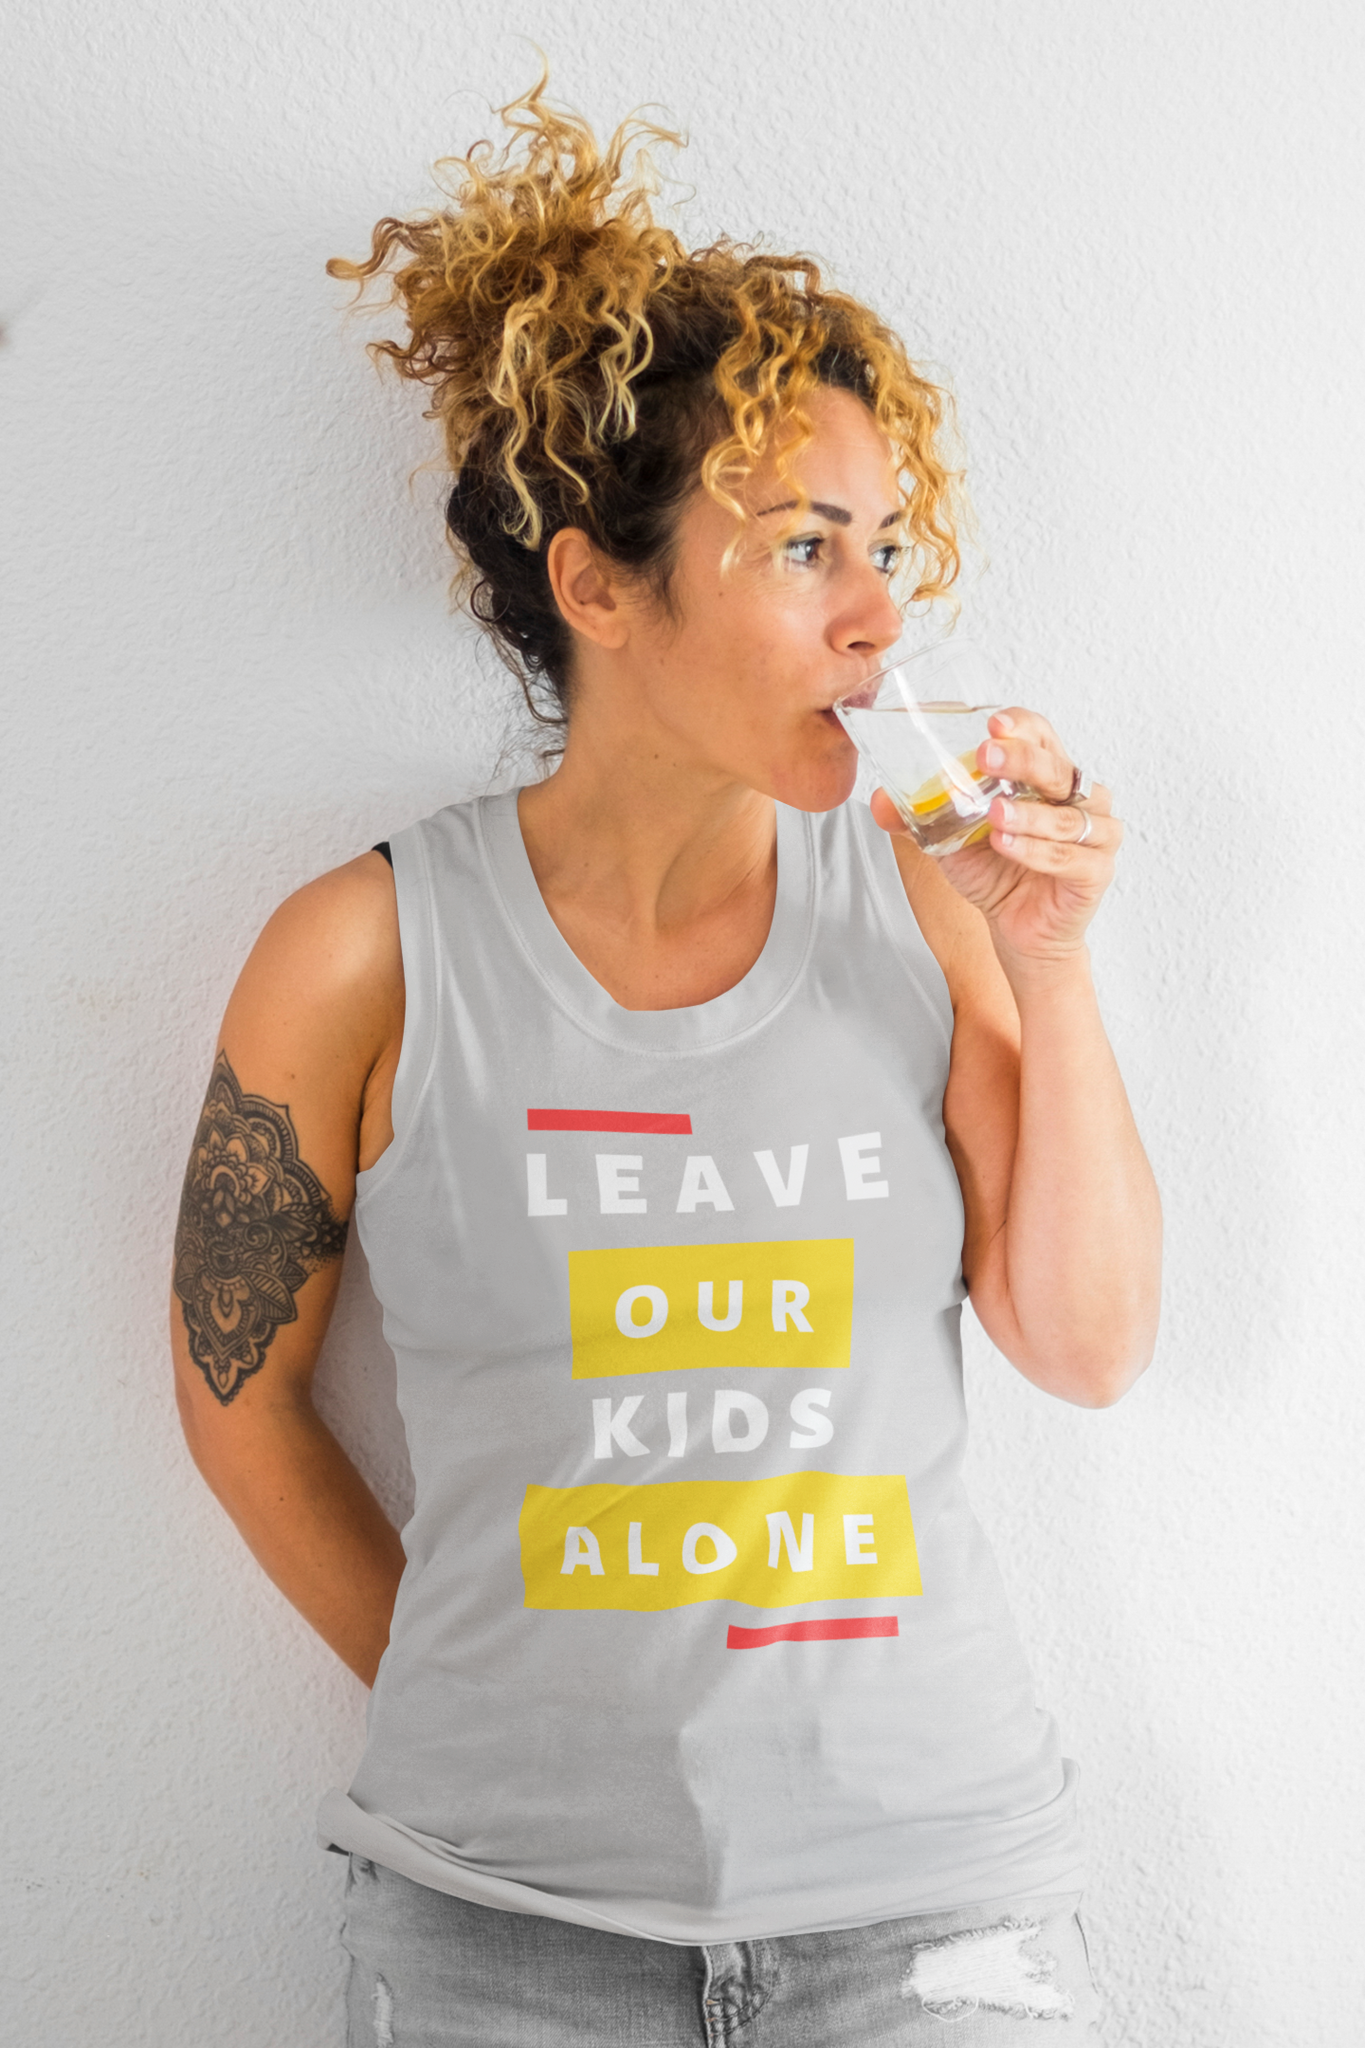 Leave Our Kids Alone Tank Top Women